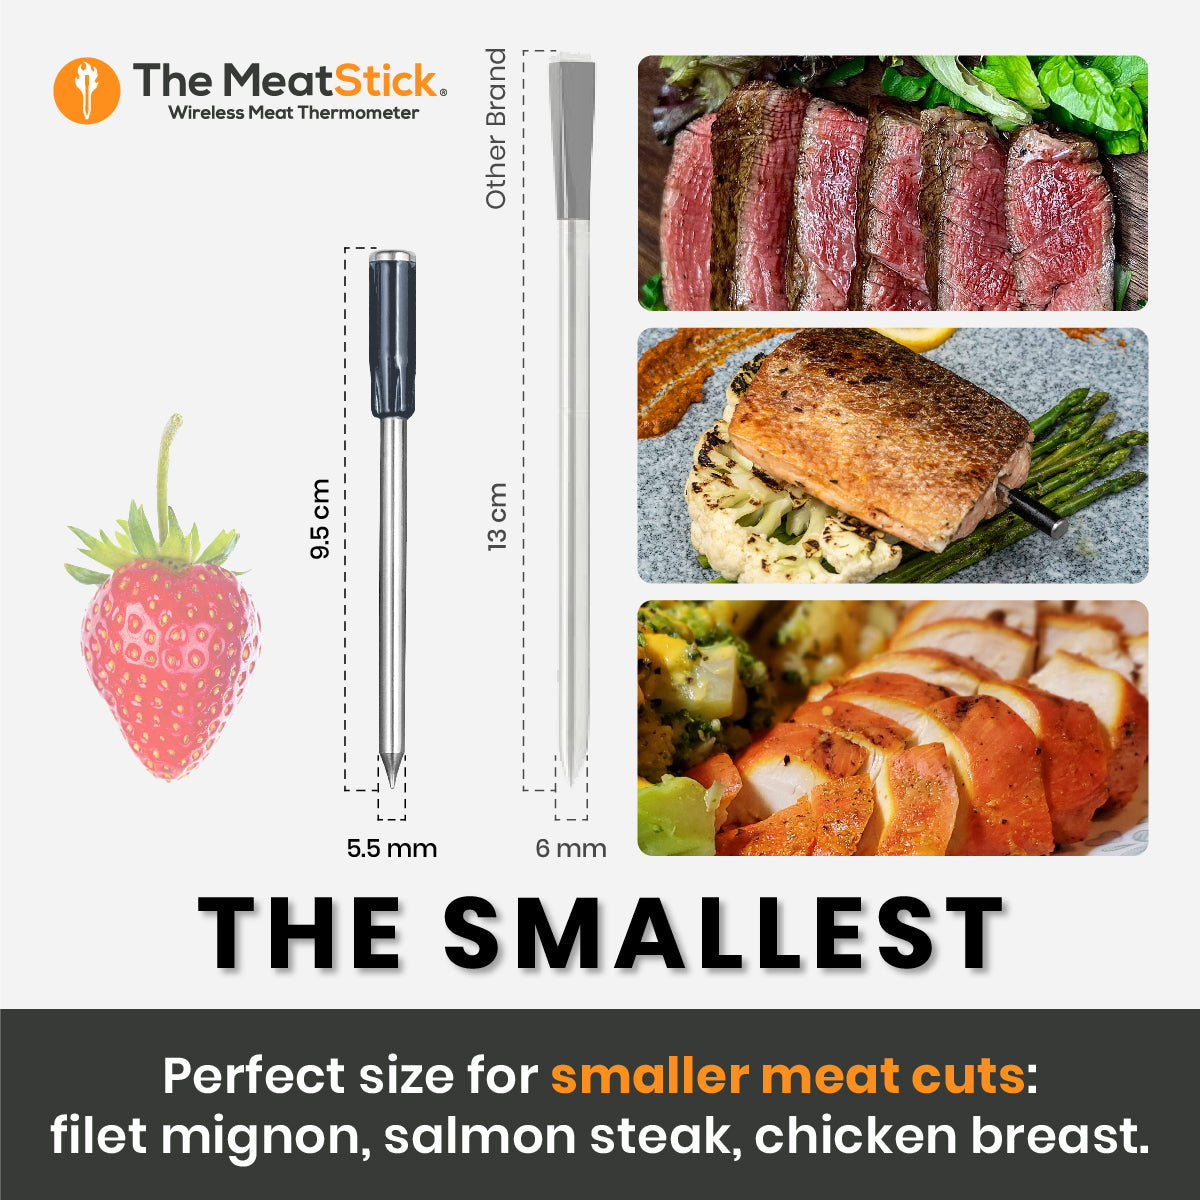 Product Review: The Meatstick 4X Wireless Meat Thermometer